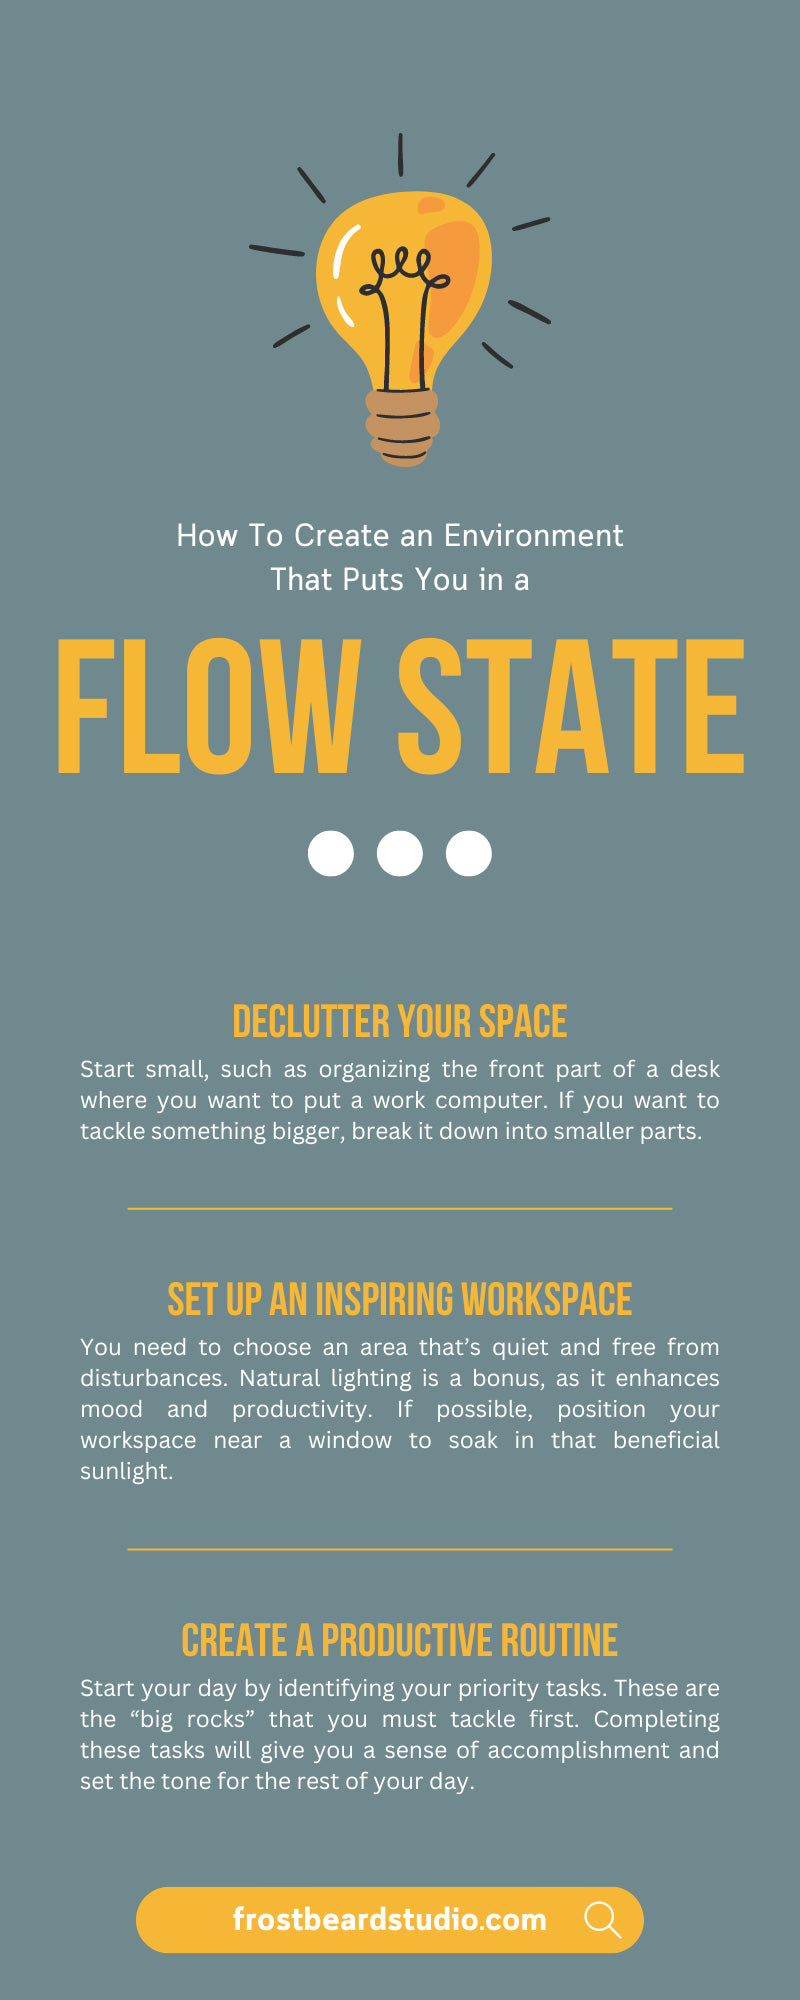 How To Create an Environment That Puts You in a Flow State